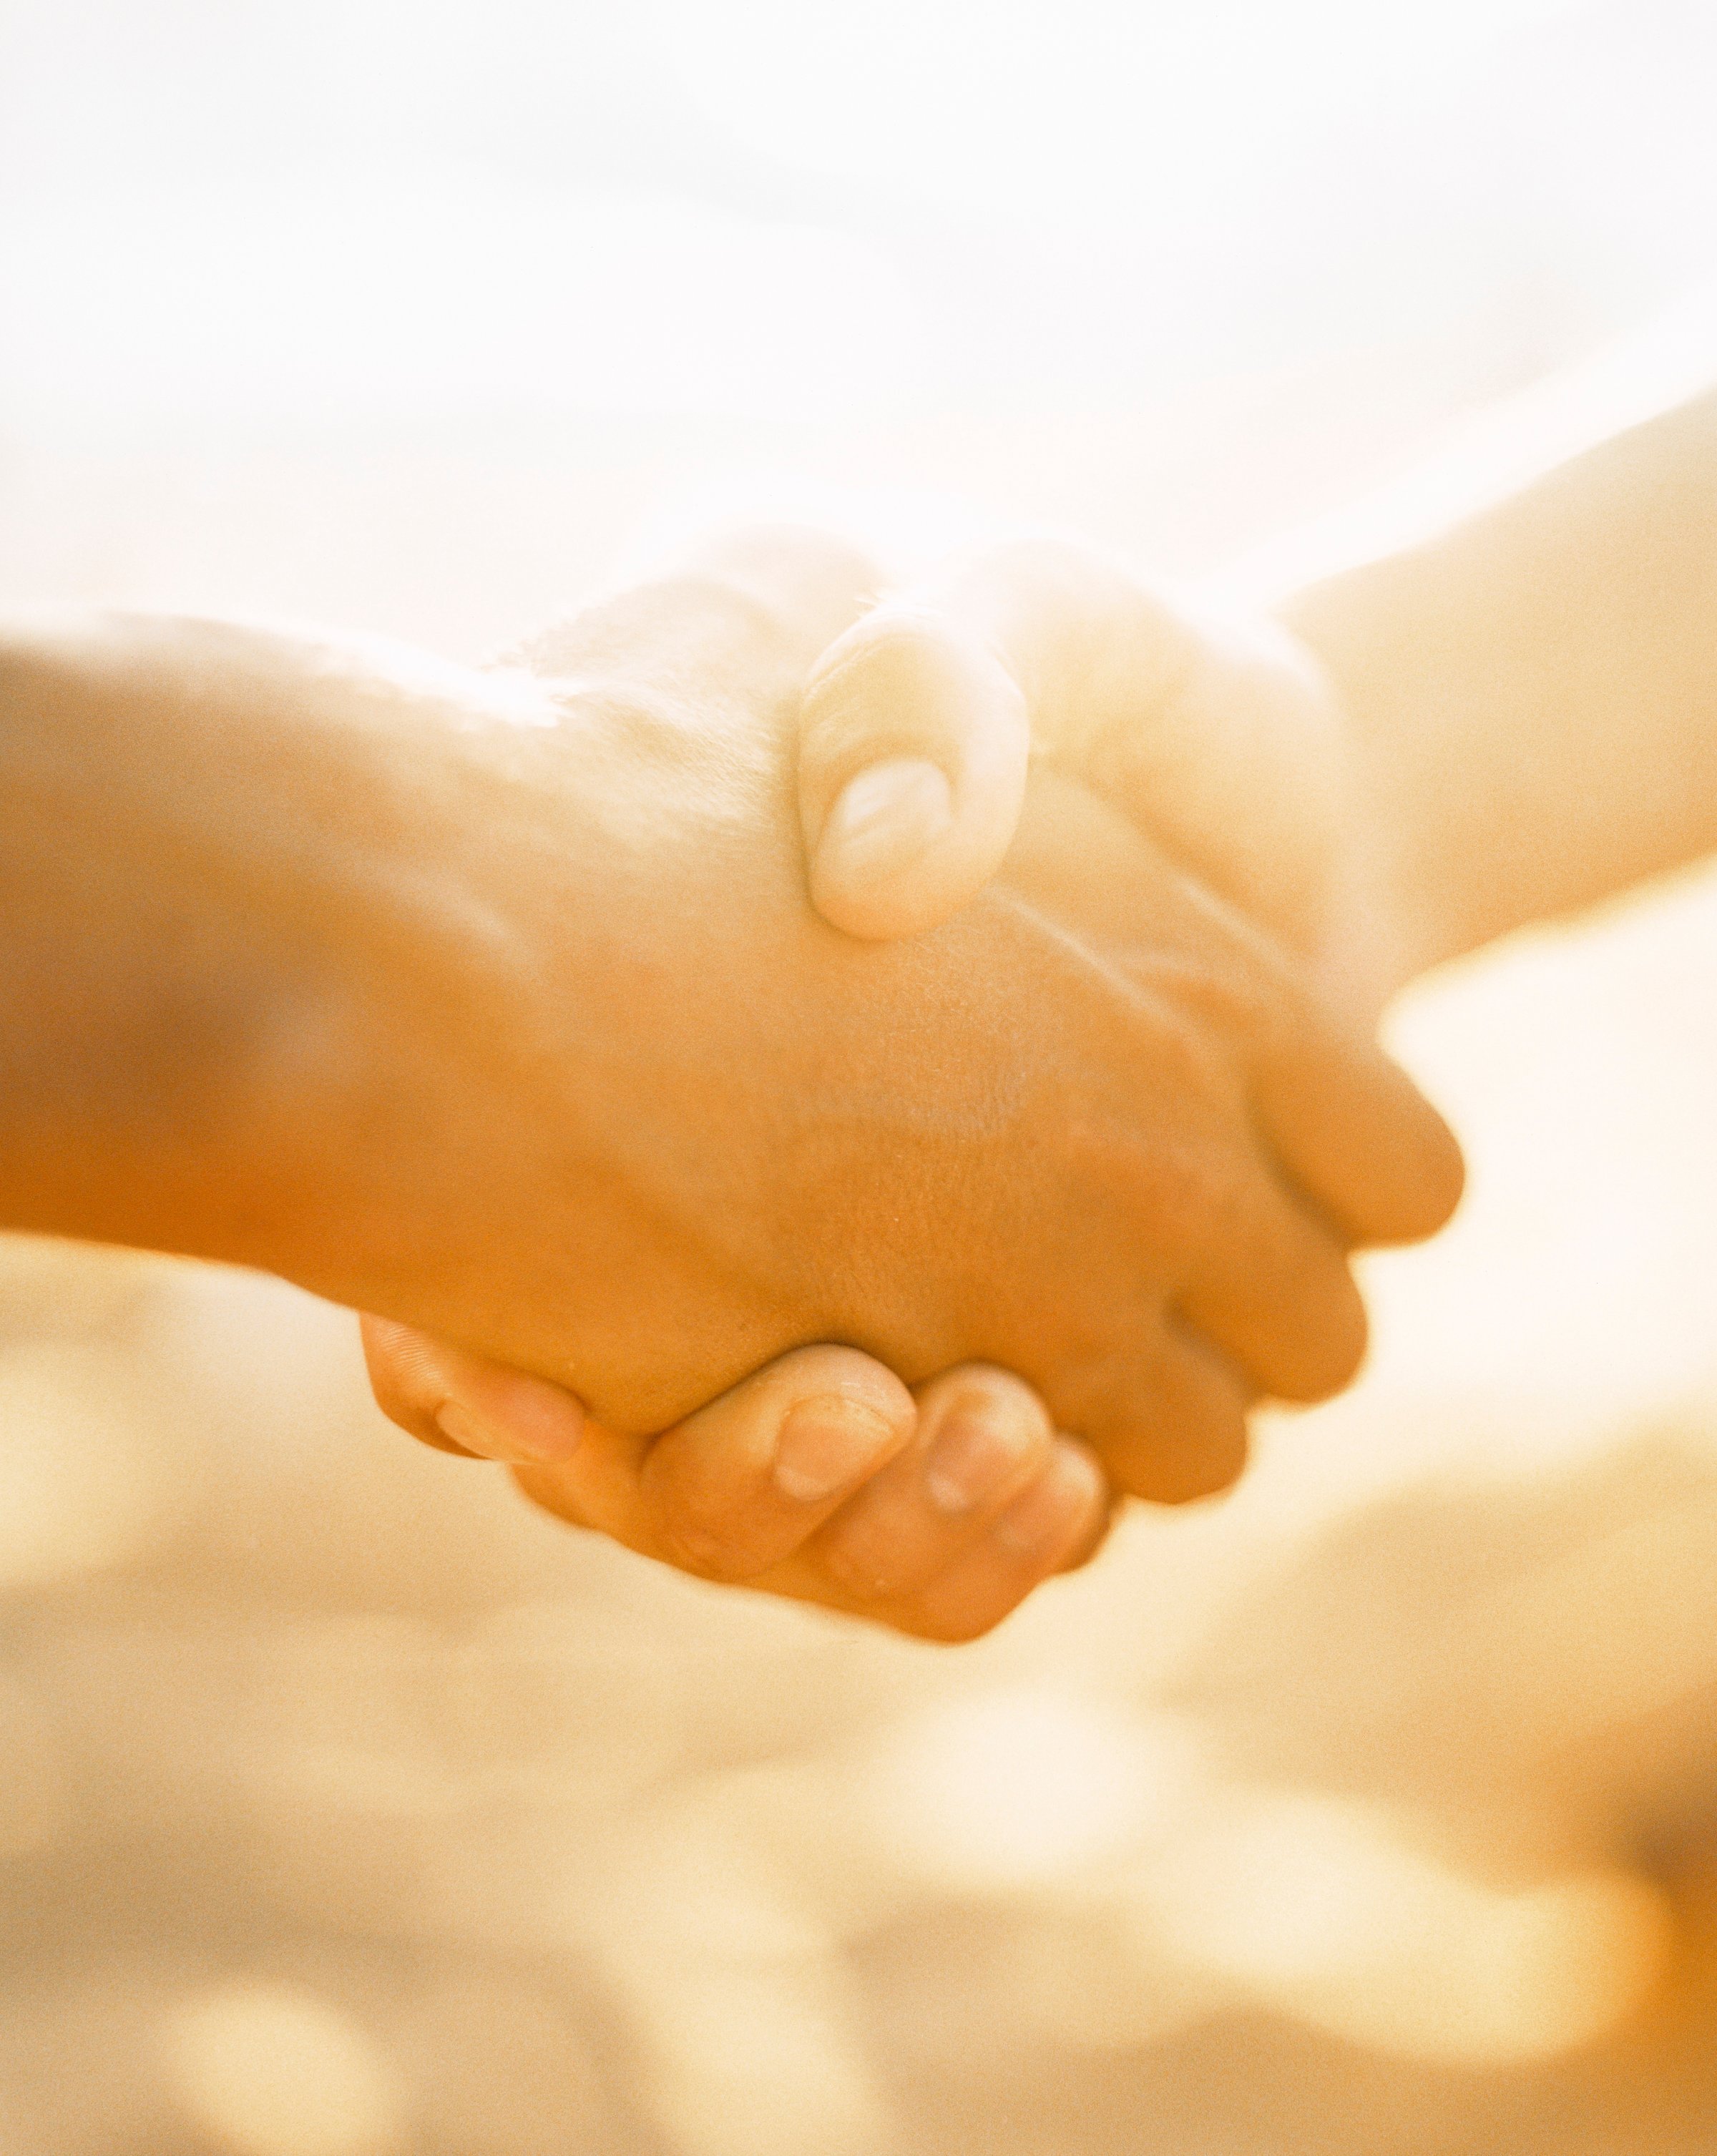 Two persons shaking hands in sunlight, close-up